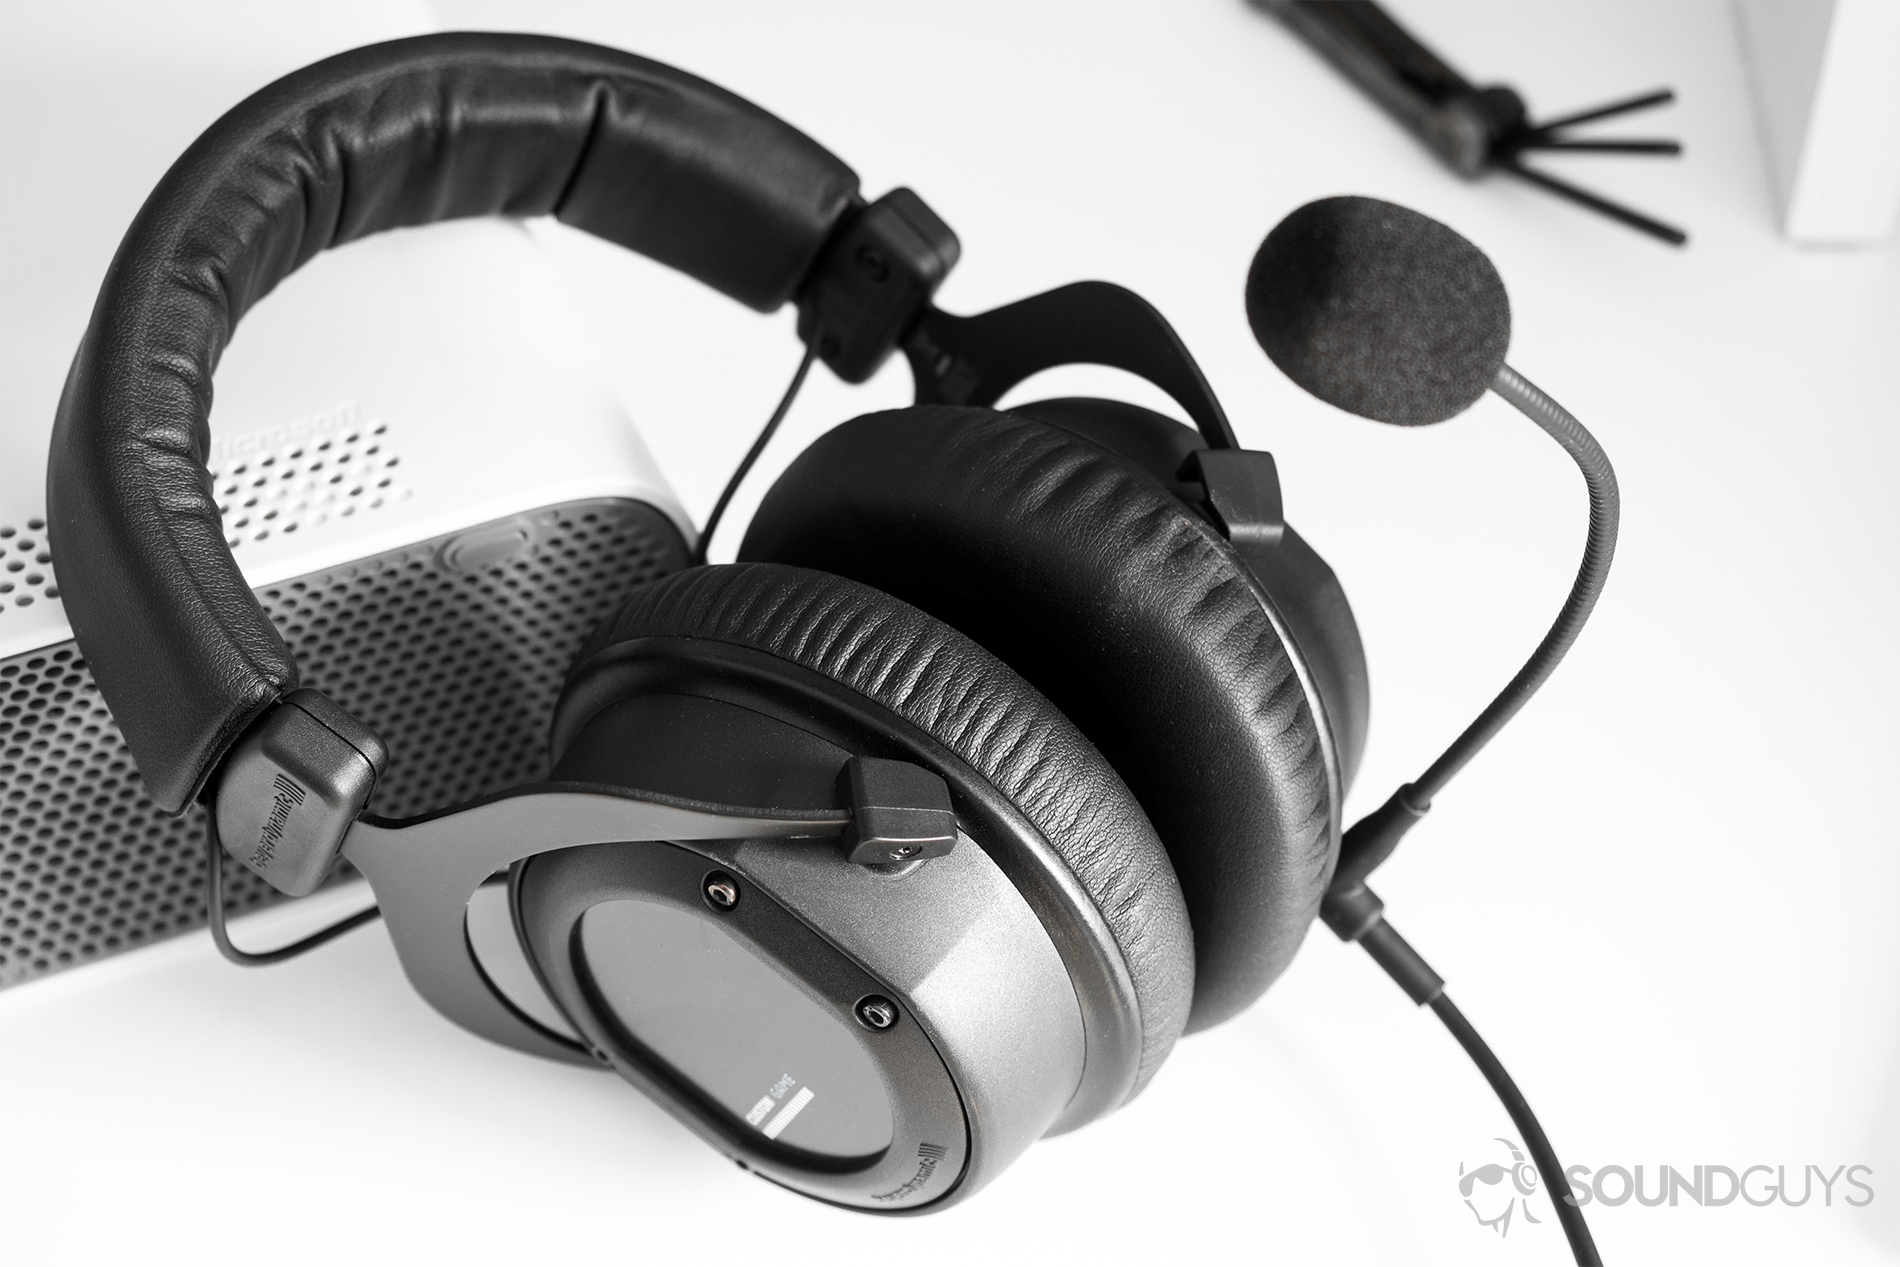 Bluetooth headphones for conference calls - SoundGuys